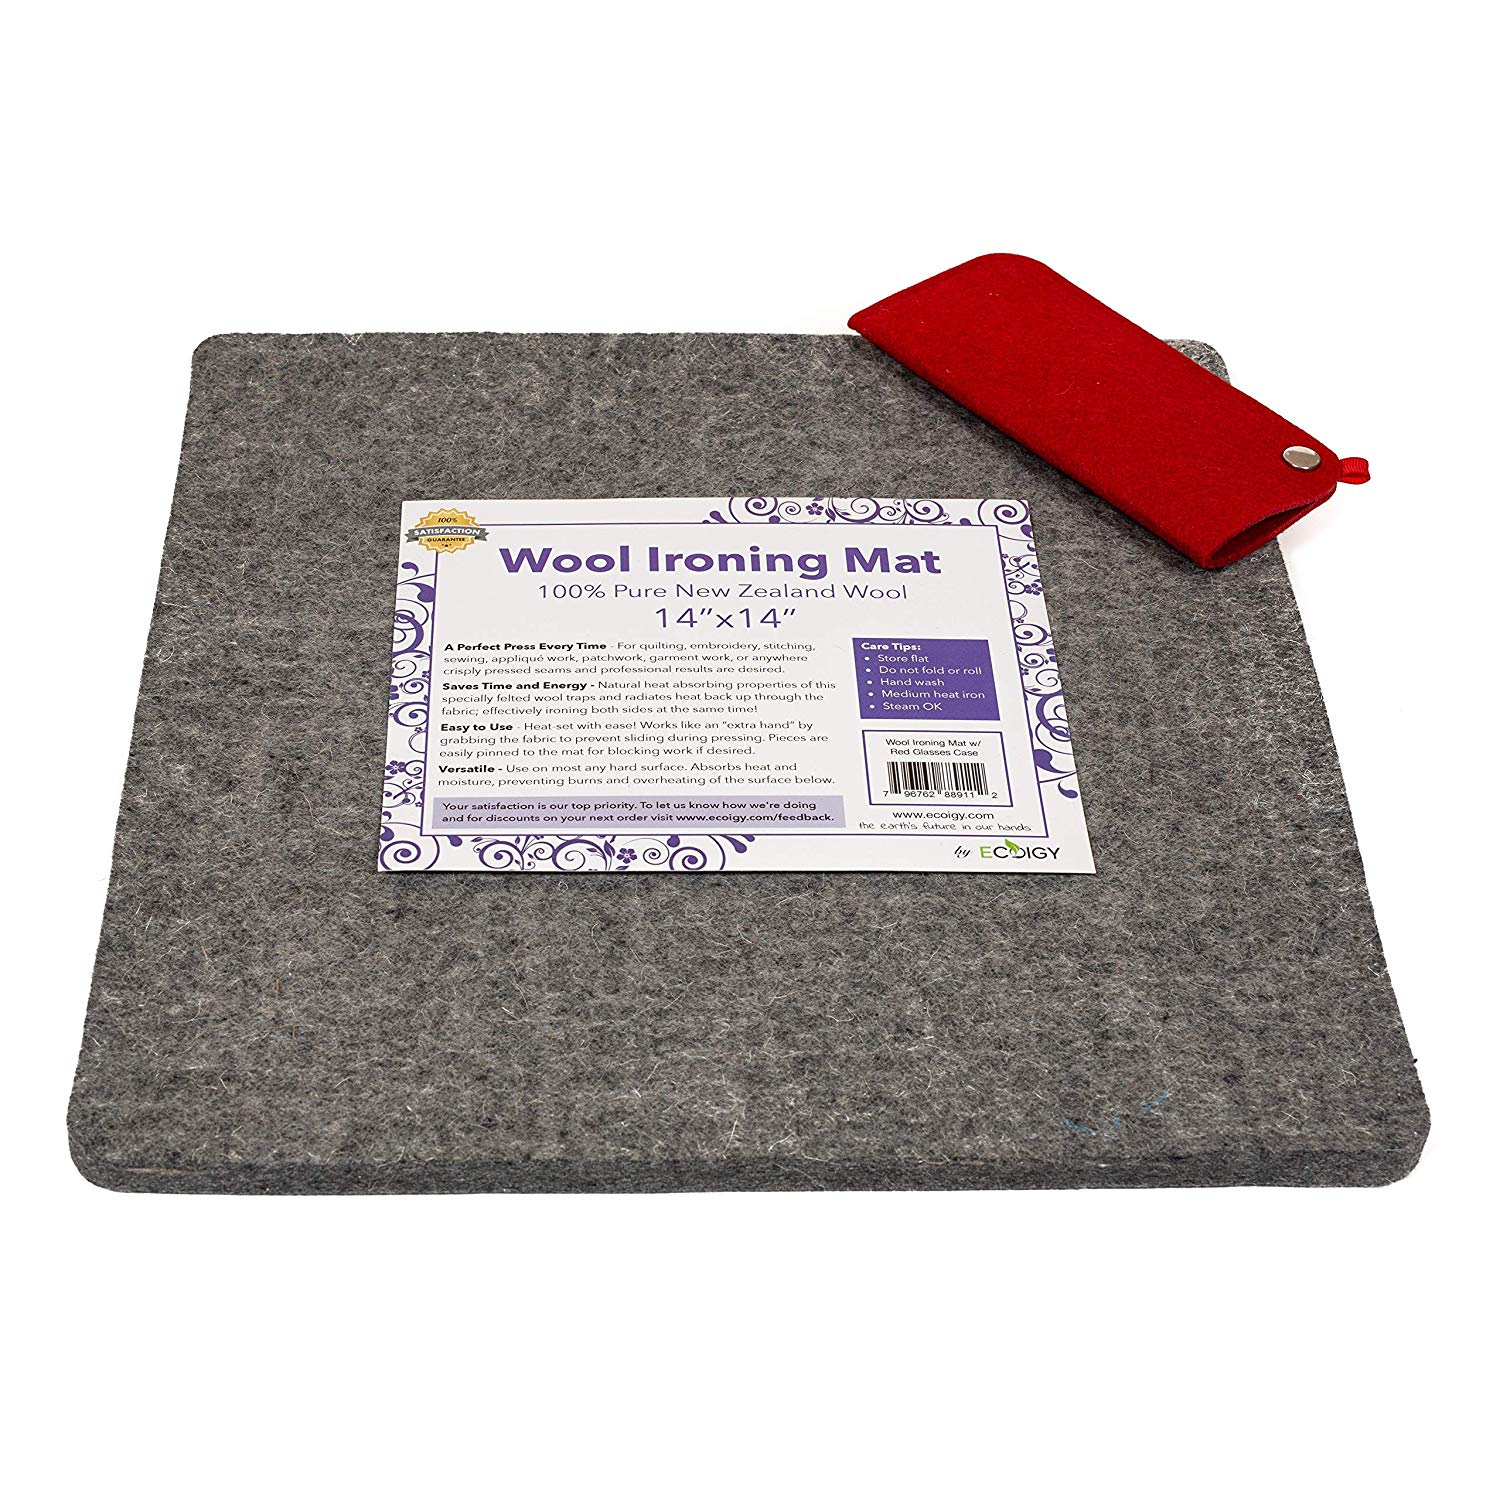 14 X 17-Wool Pressing Mat for Quilting-100% New Zealand Wool Ironing Mat-Portable for Quilting,Sewing,Pressing Seams,Embroidery Crafts Perfect Gifts